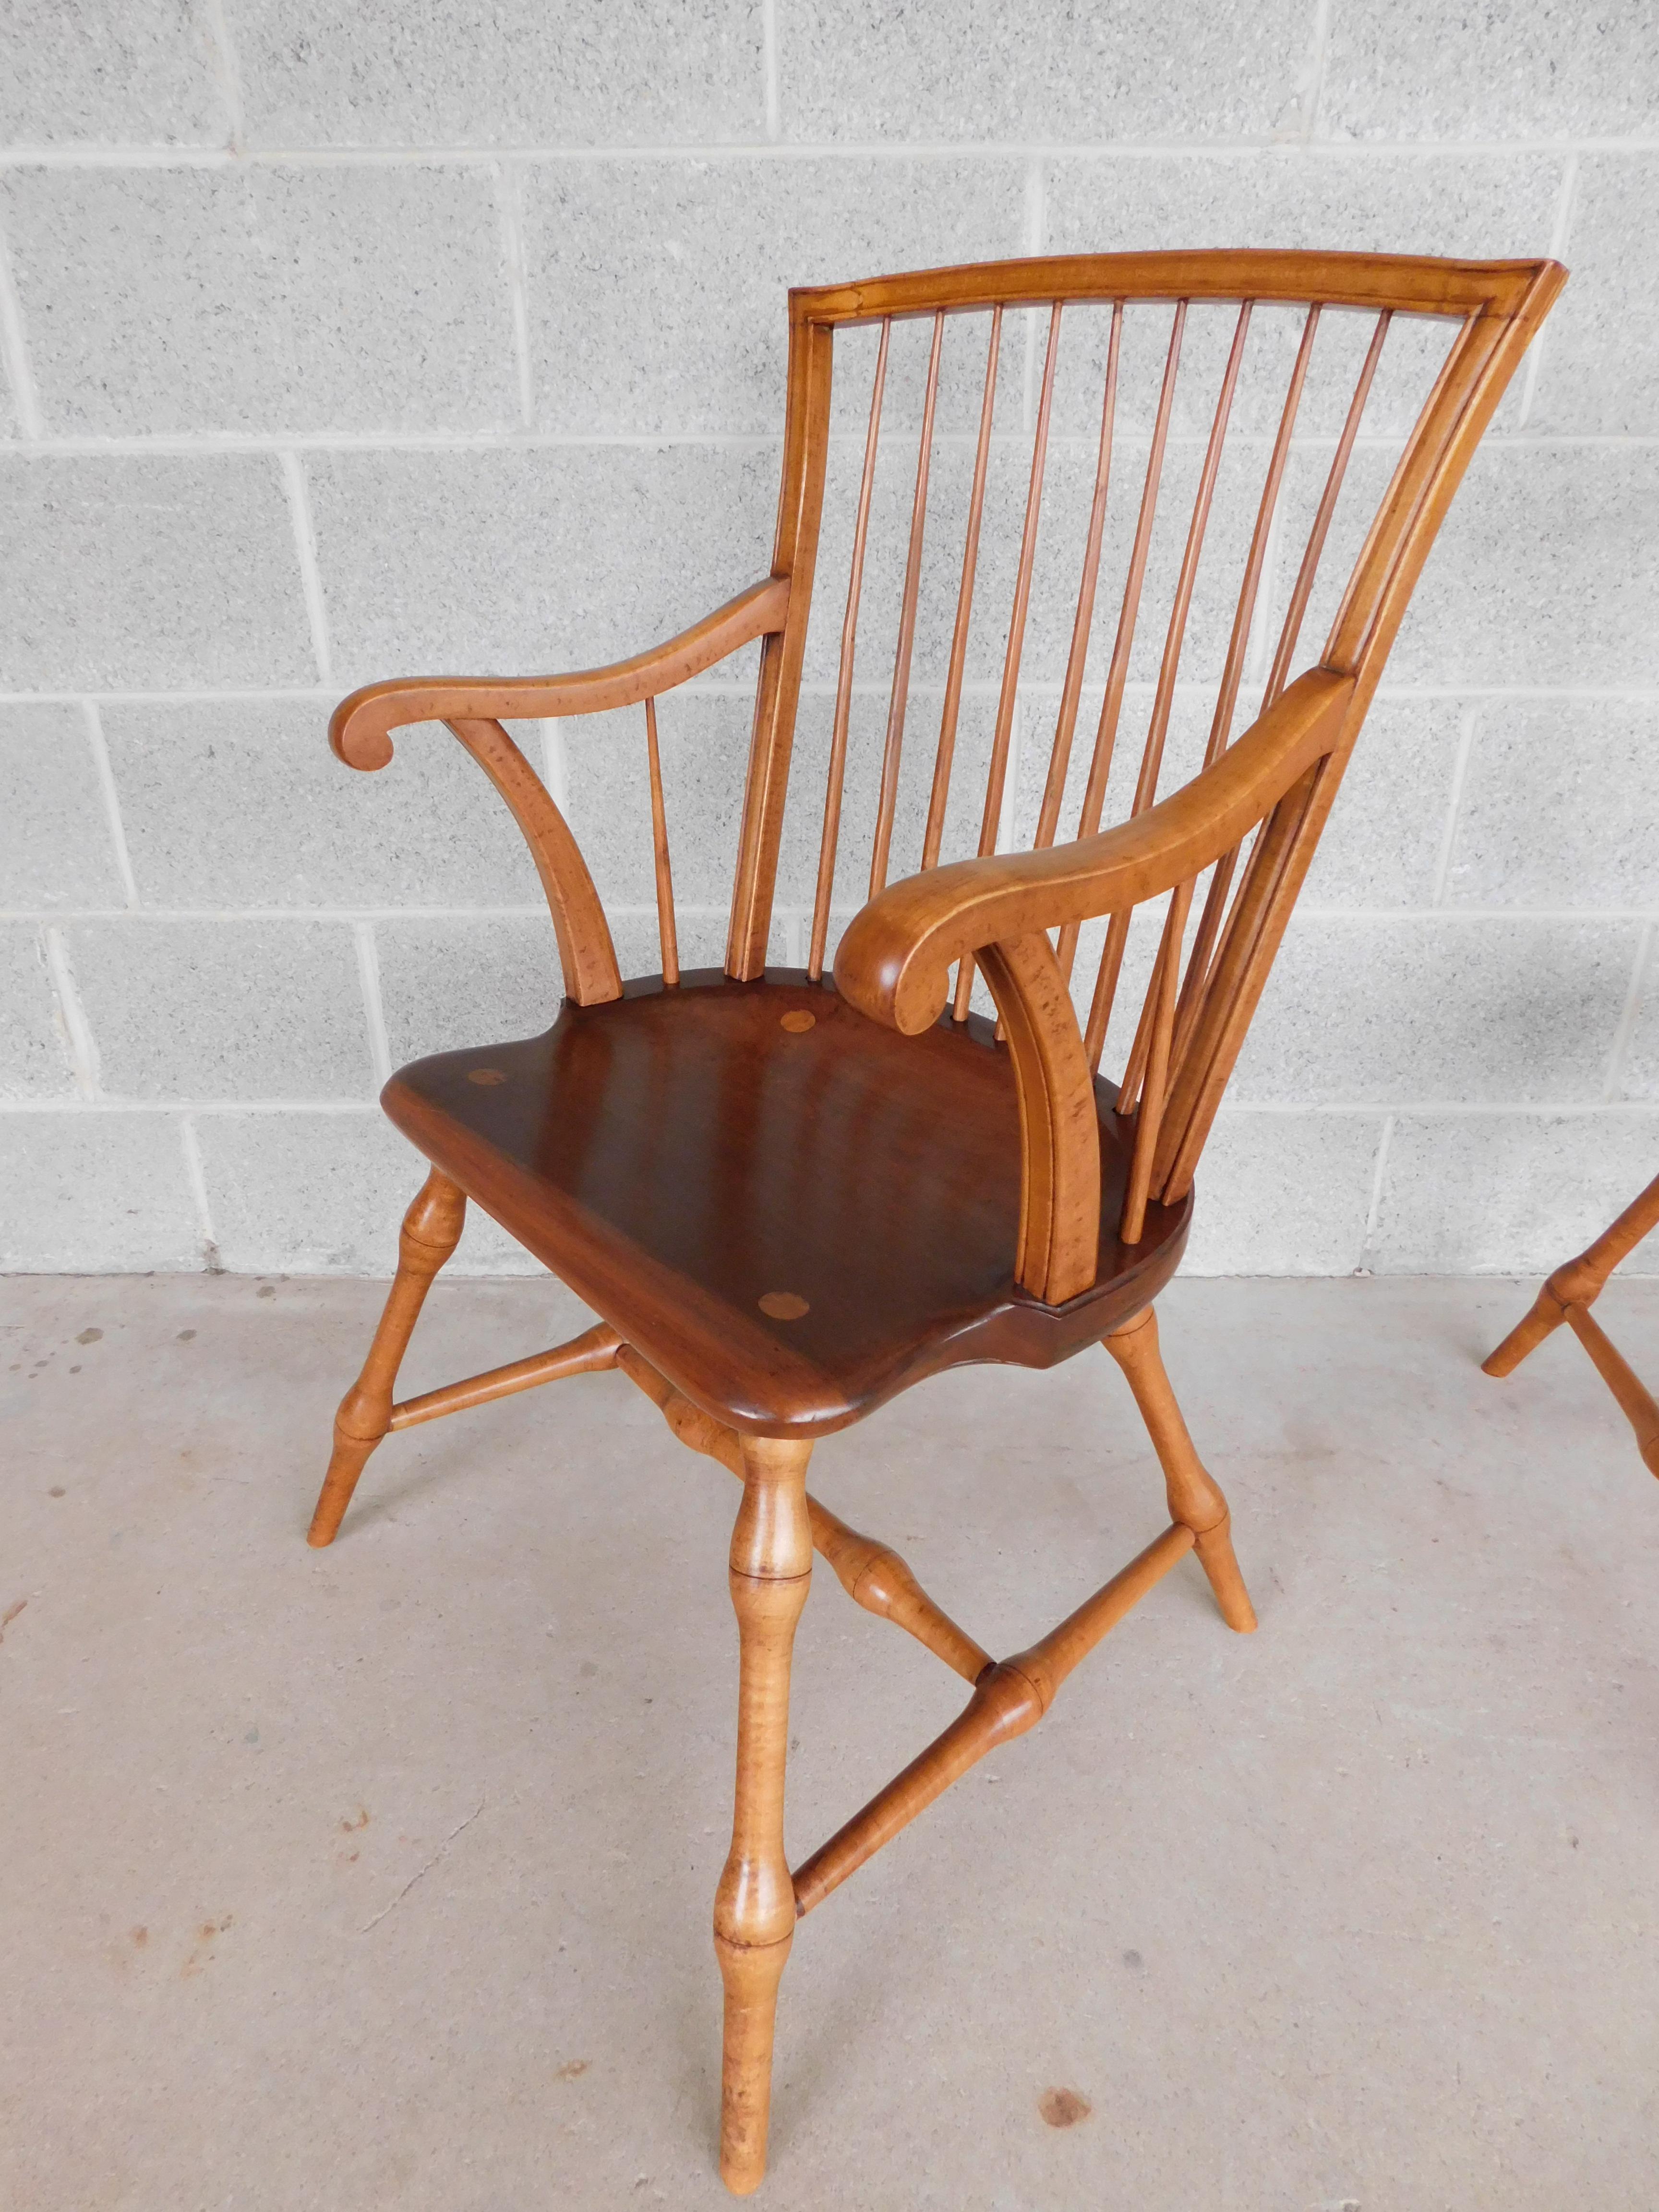 Vintage Bird Cage Windsor Chairs, Set of 6 by Marlow of York Pa For Sale 6